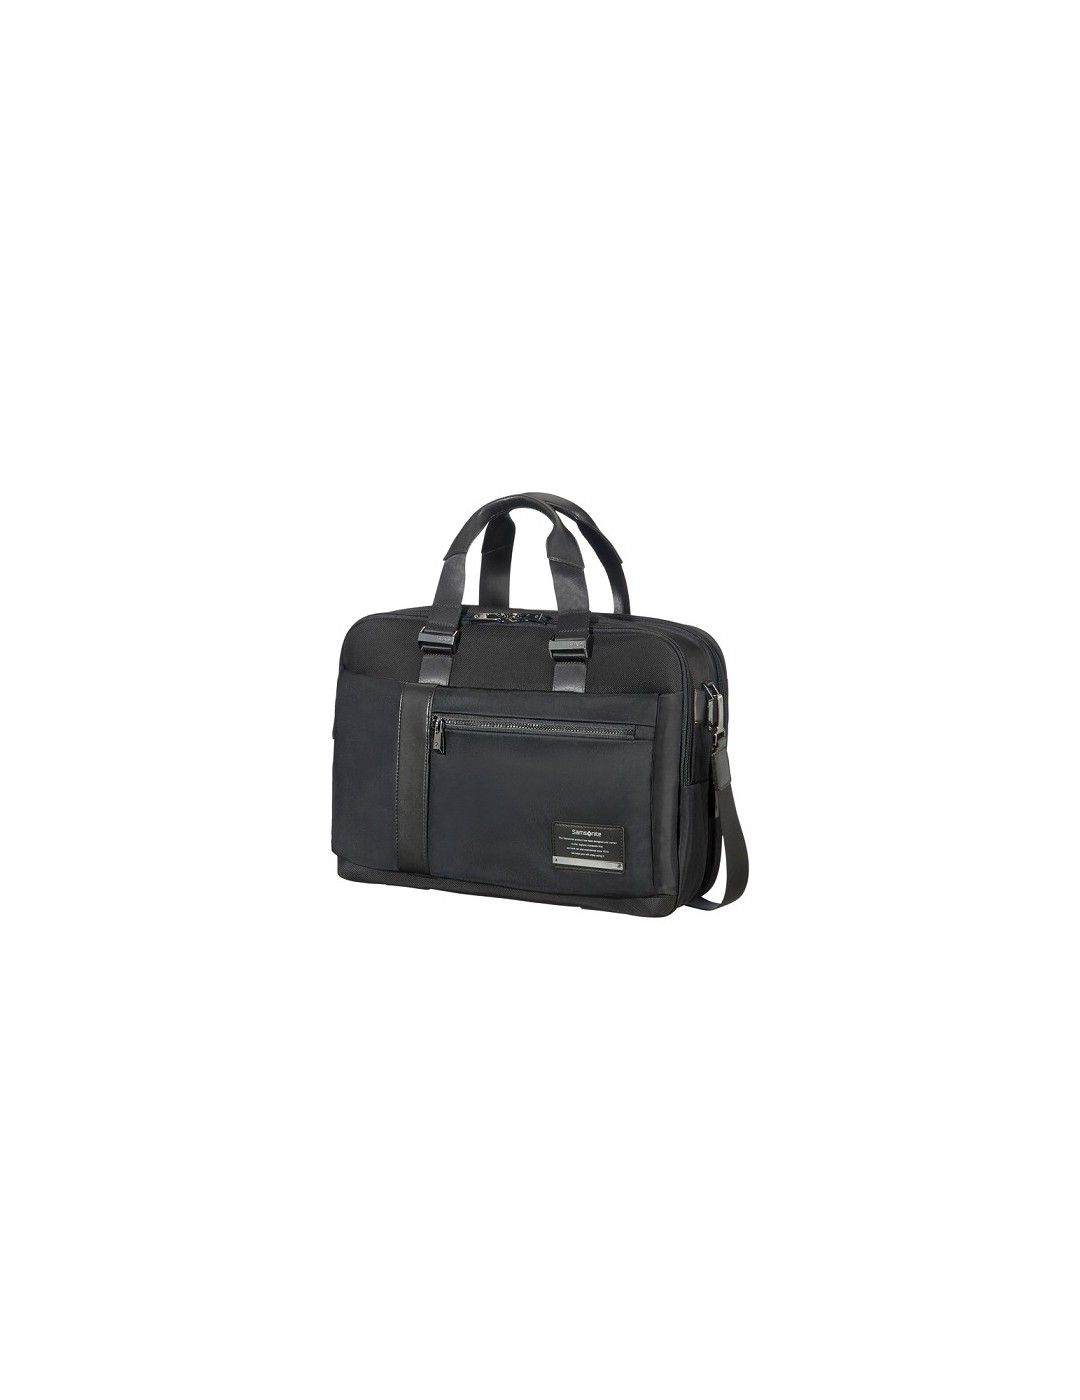 Samsonite Openroad briefcase 15.6 inches